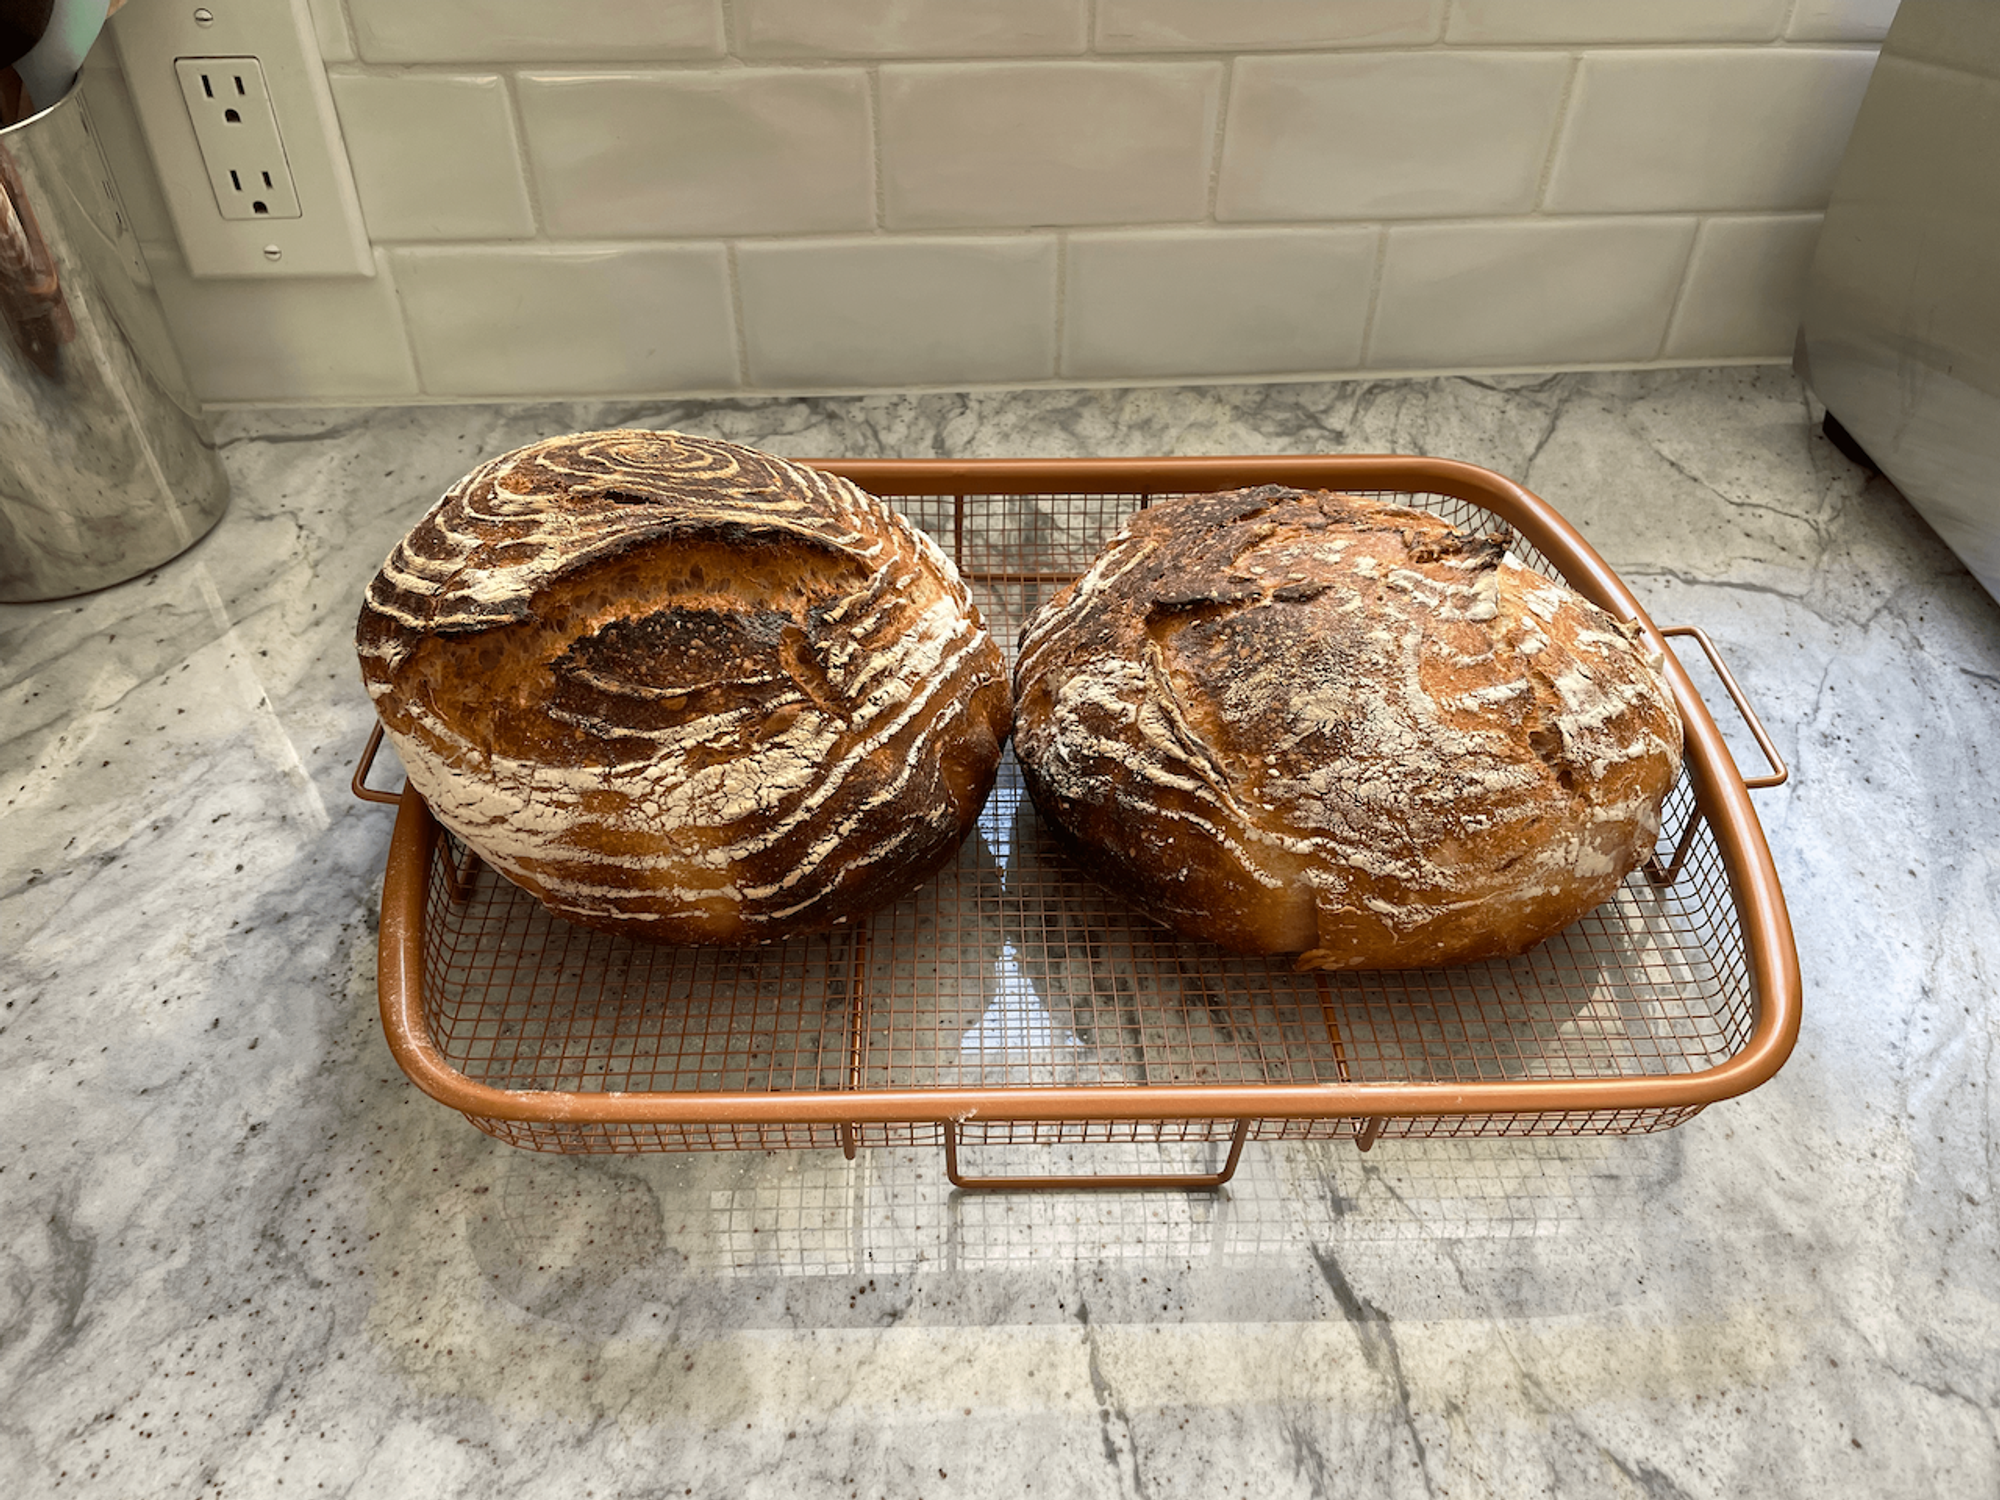 Life is better with Sourdough - Summer 2021